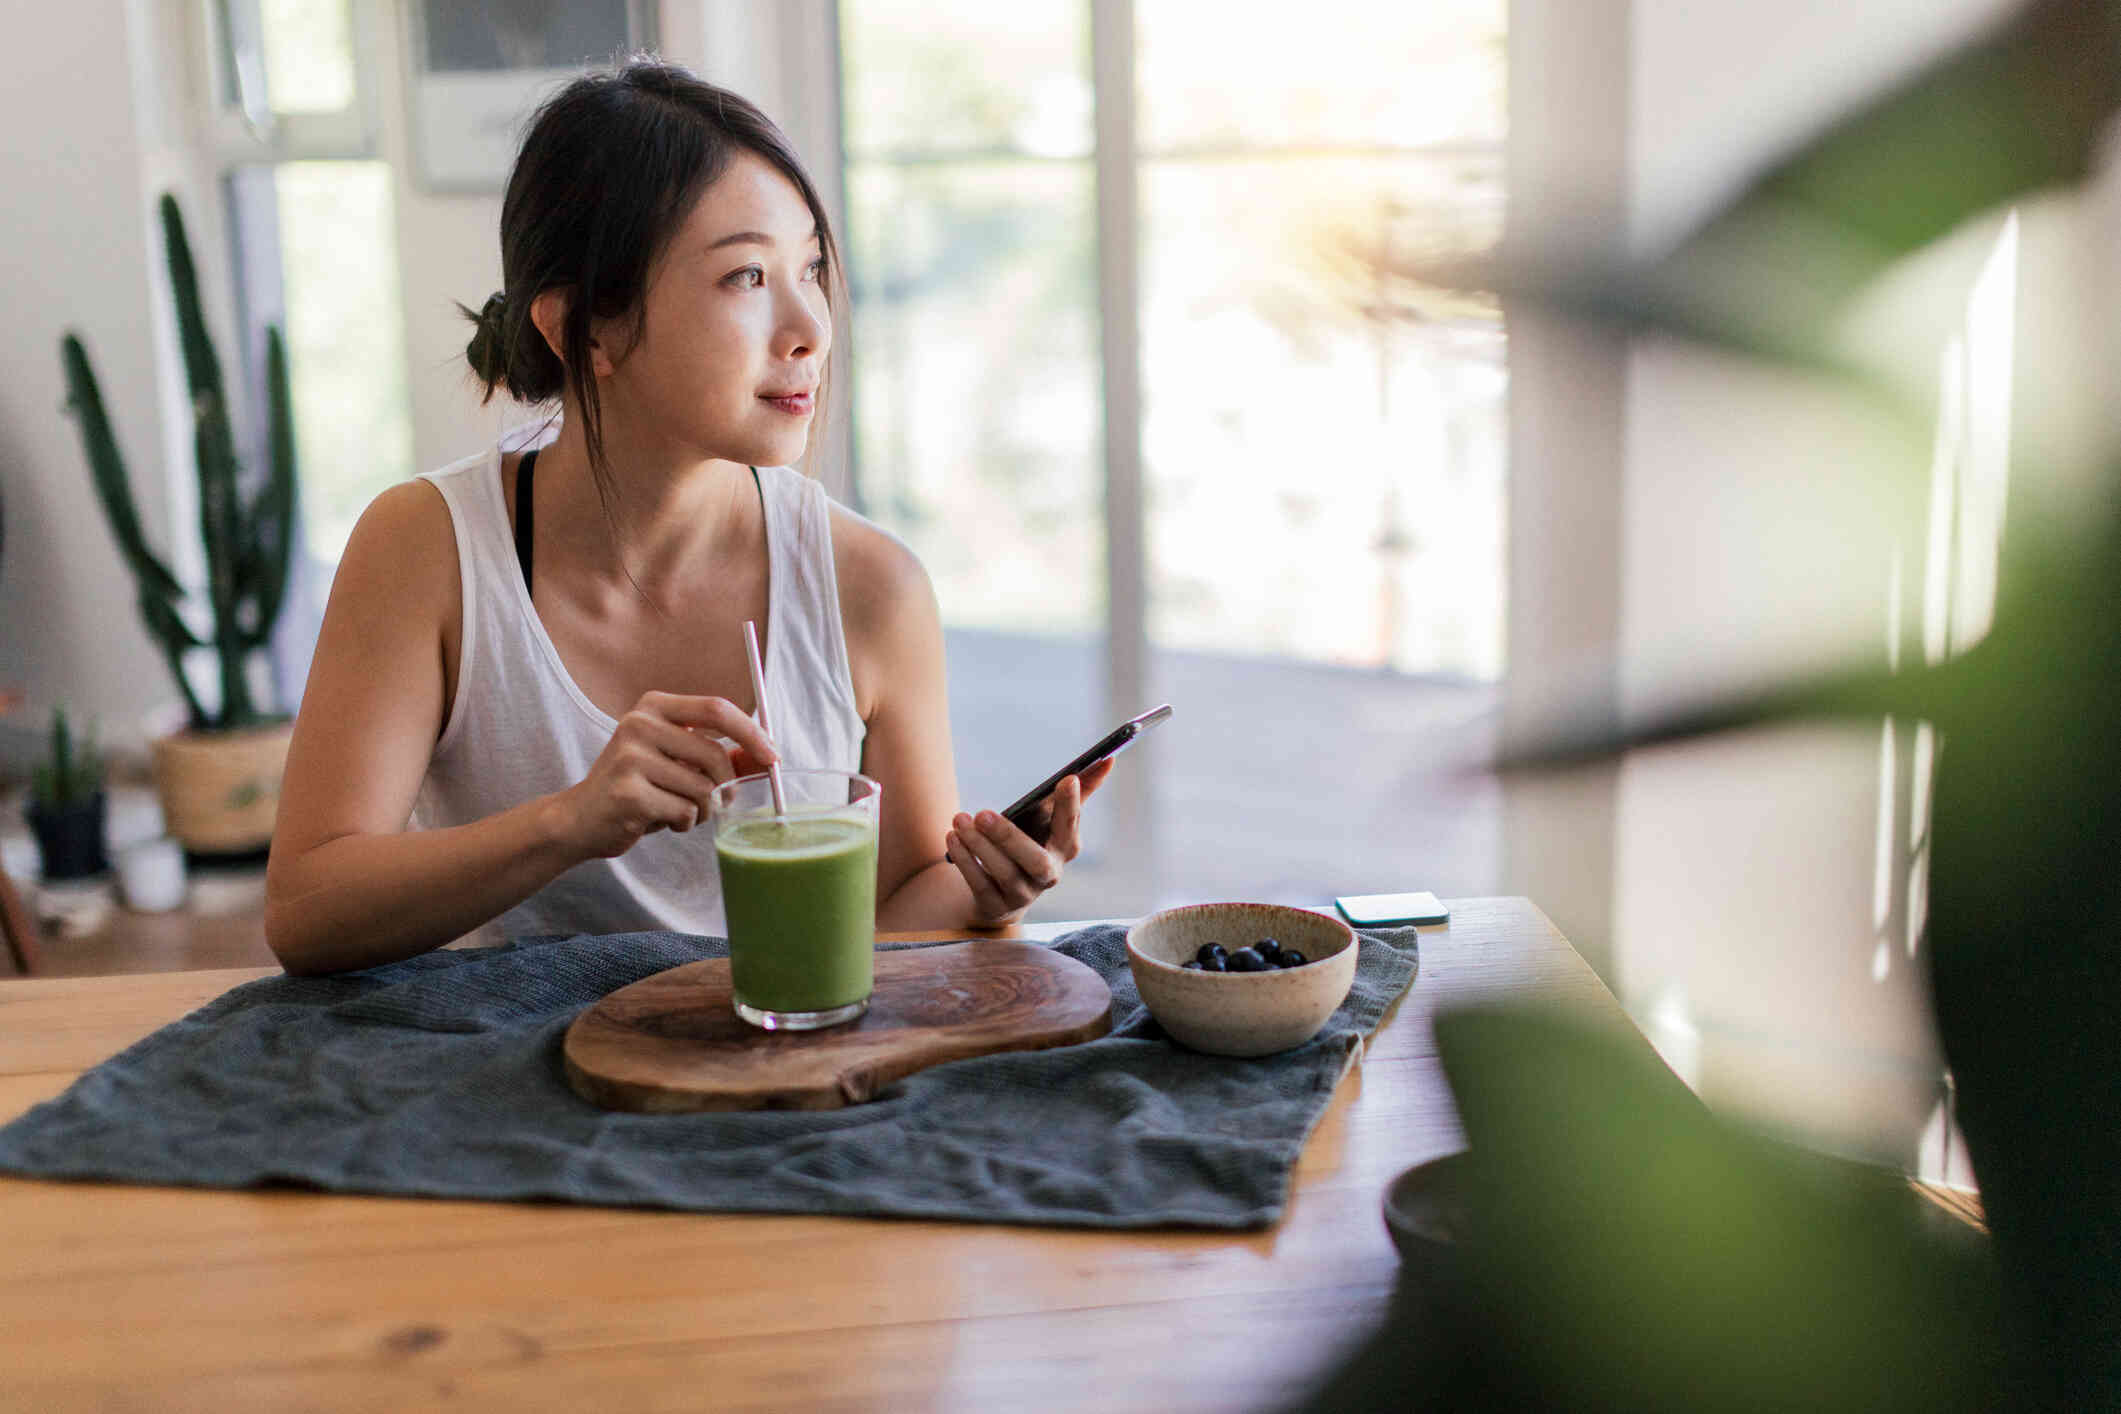 A woman in a wite tank top sits at the kitchen table with a green smoothie and a cellphone in her hand as she gazes out of the window on a sunny day.